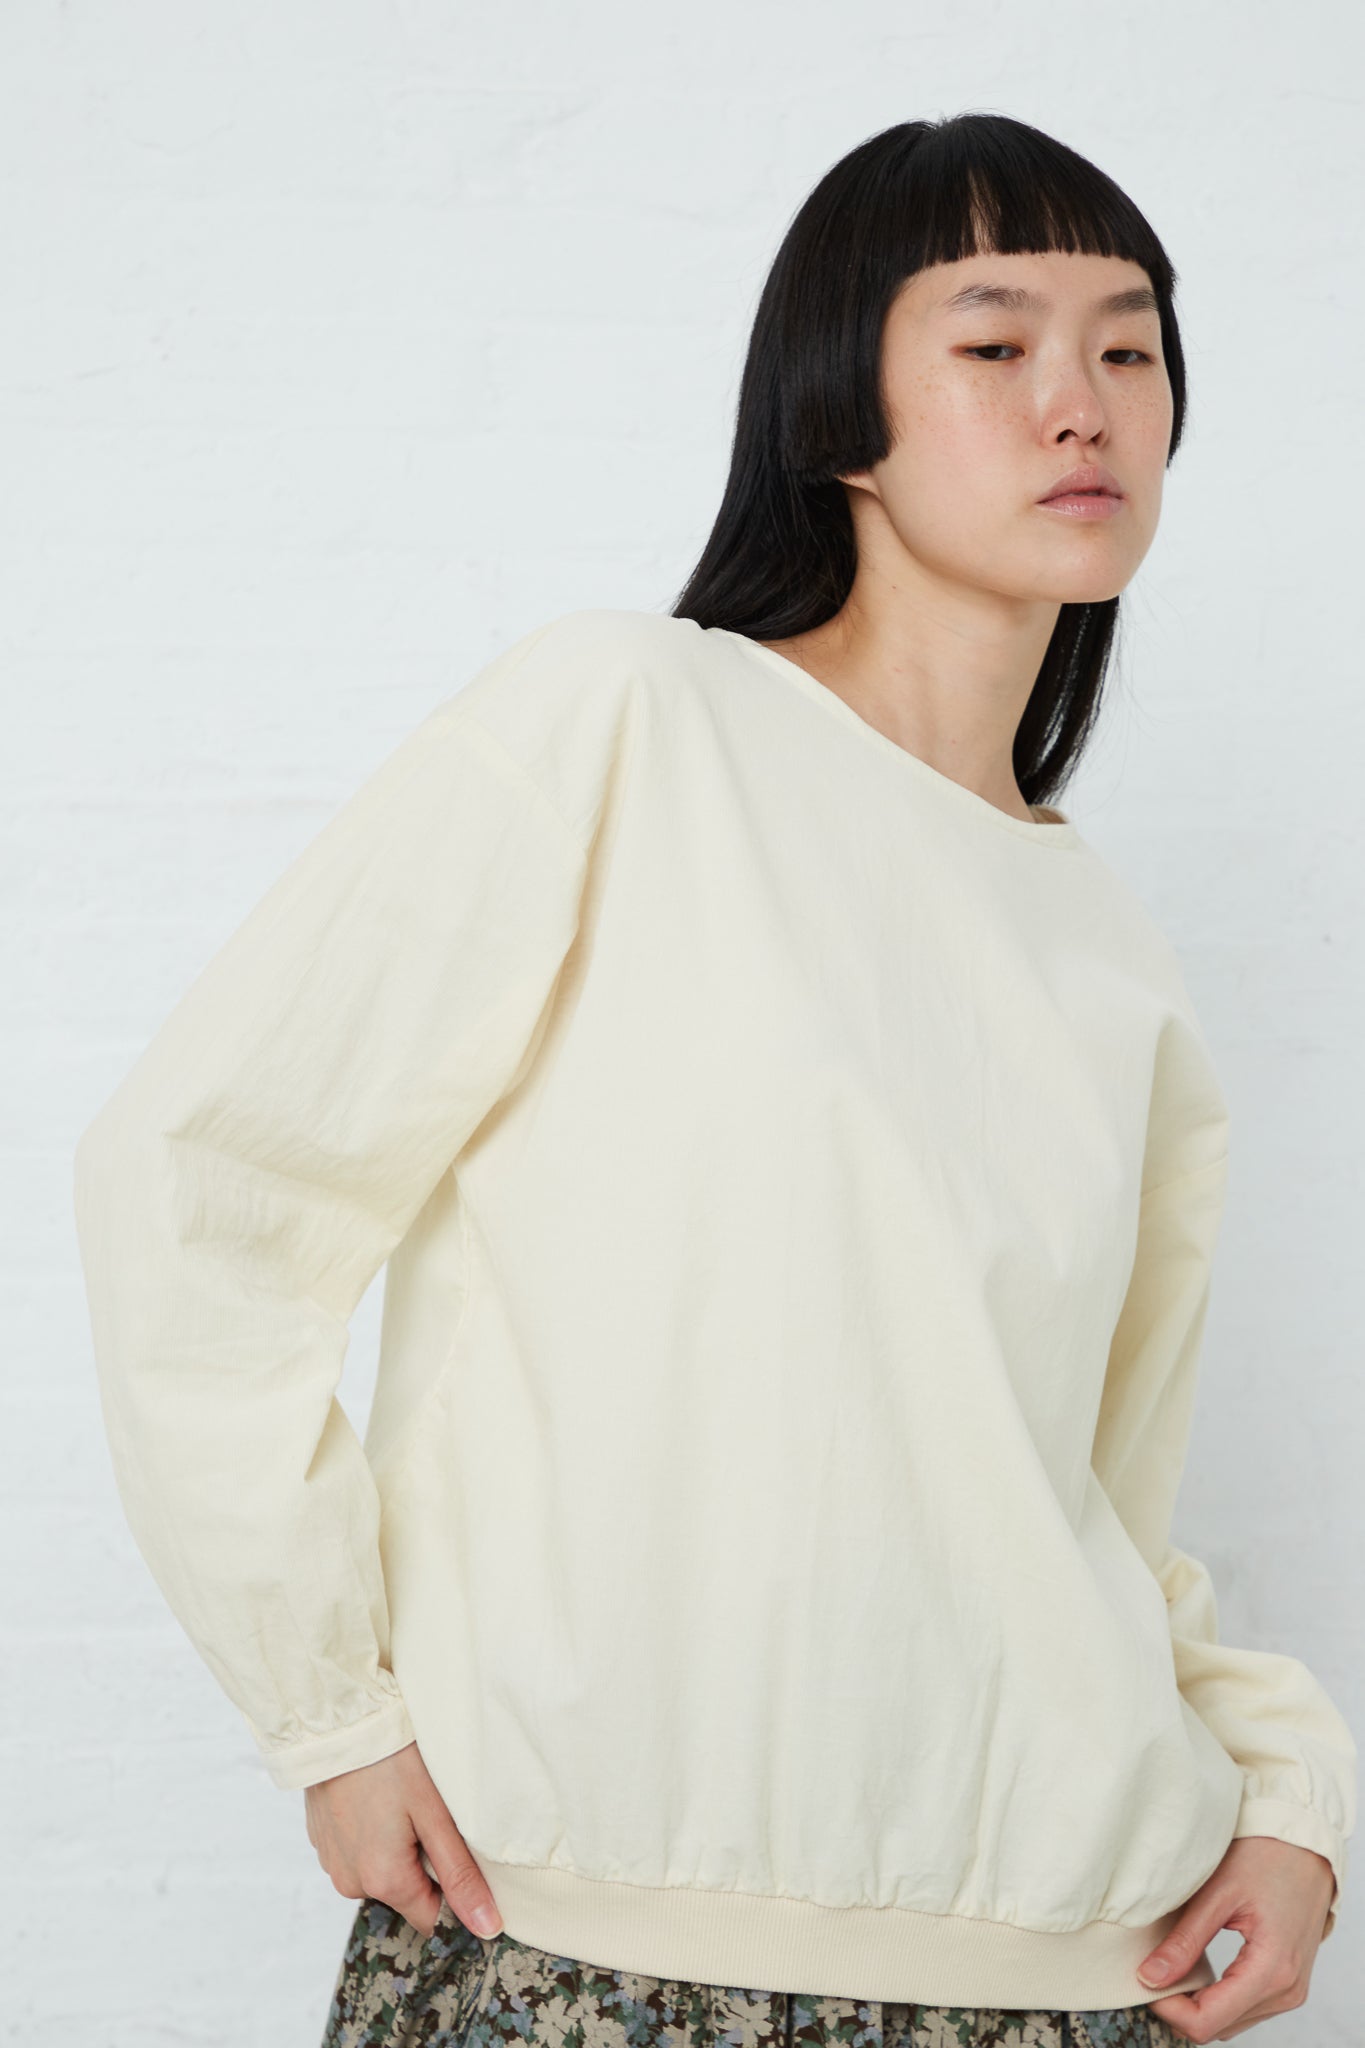 The model is wearing a relaxed fit Ivory cotton sweatshirt, an Ichi pullover top with long sleeves.